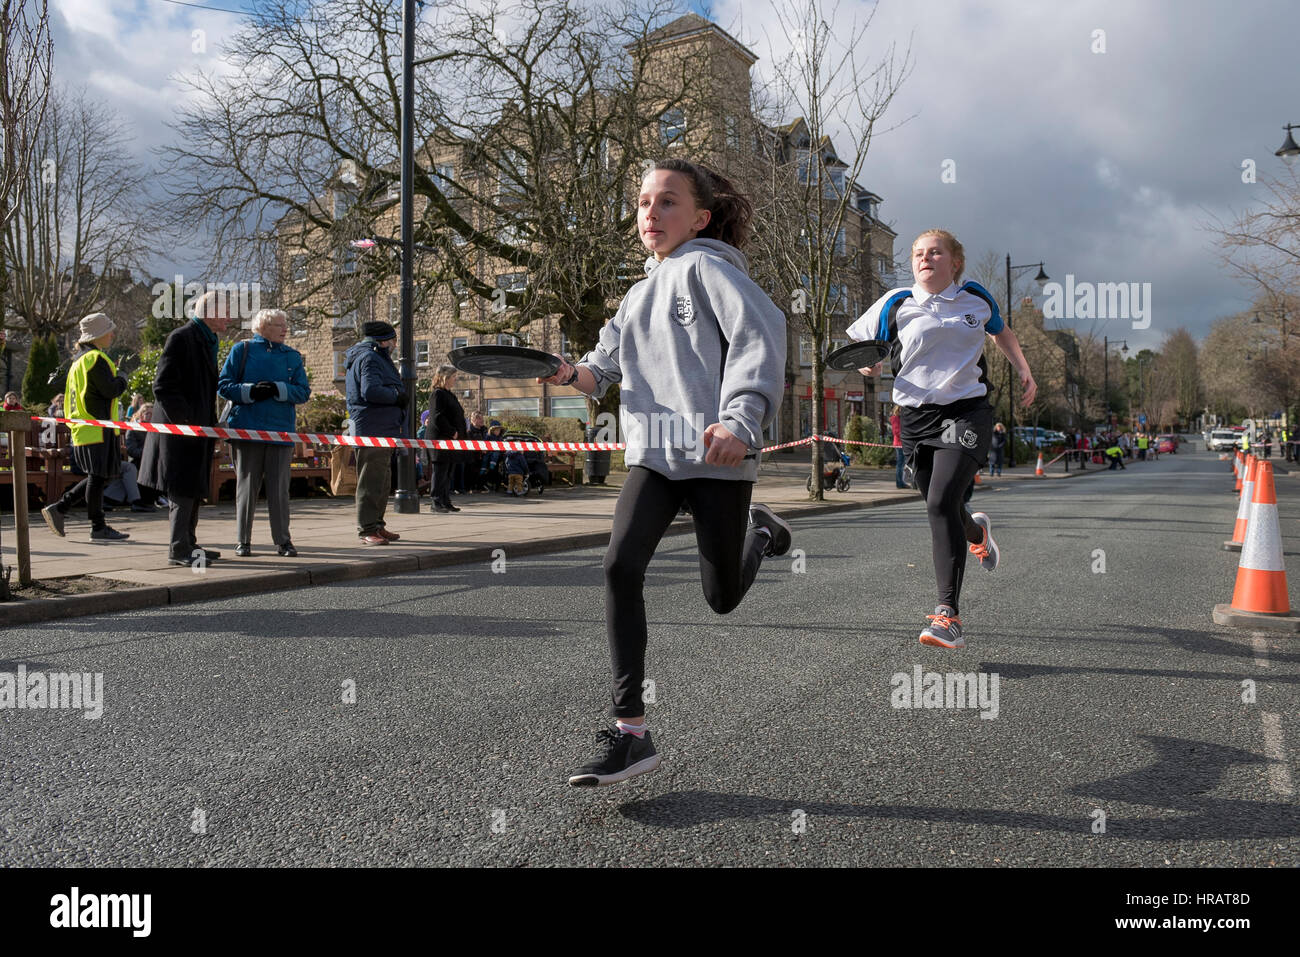 The Grove, Ilkley, West Yorkshire, UK. 28th Feb, 2017. Young competitors (school girls) are taking part and running in the traditional, annual Ilkley Rotary Pancake Race. Credit: Ian Lamond/Alamy Live News Stock Photo